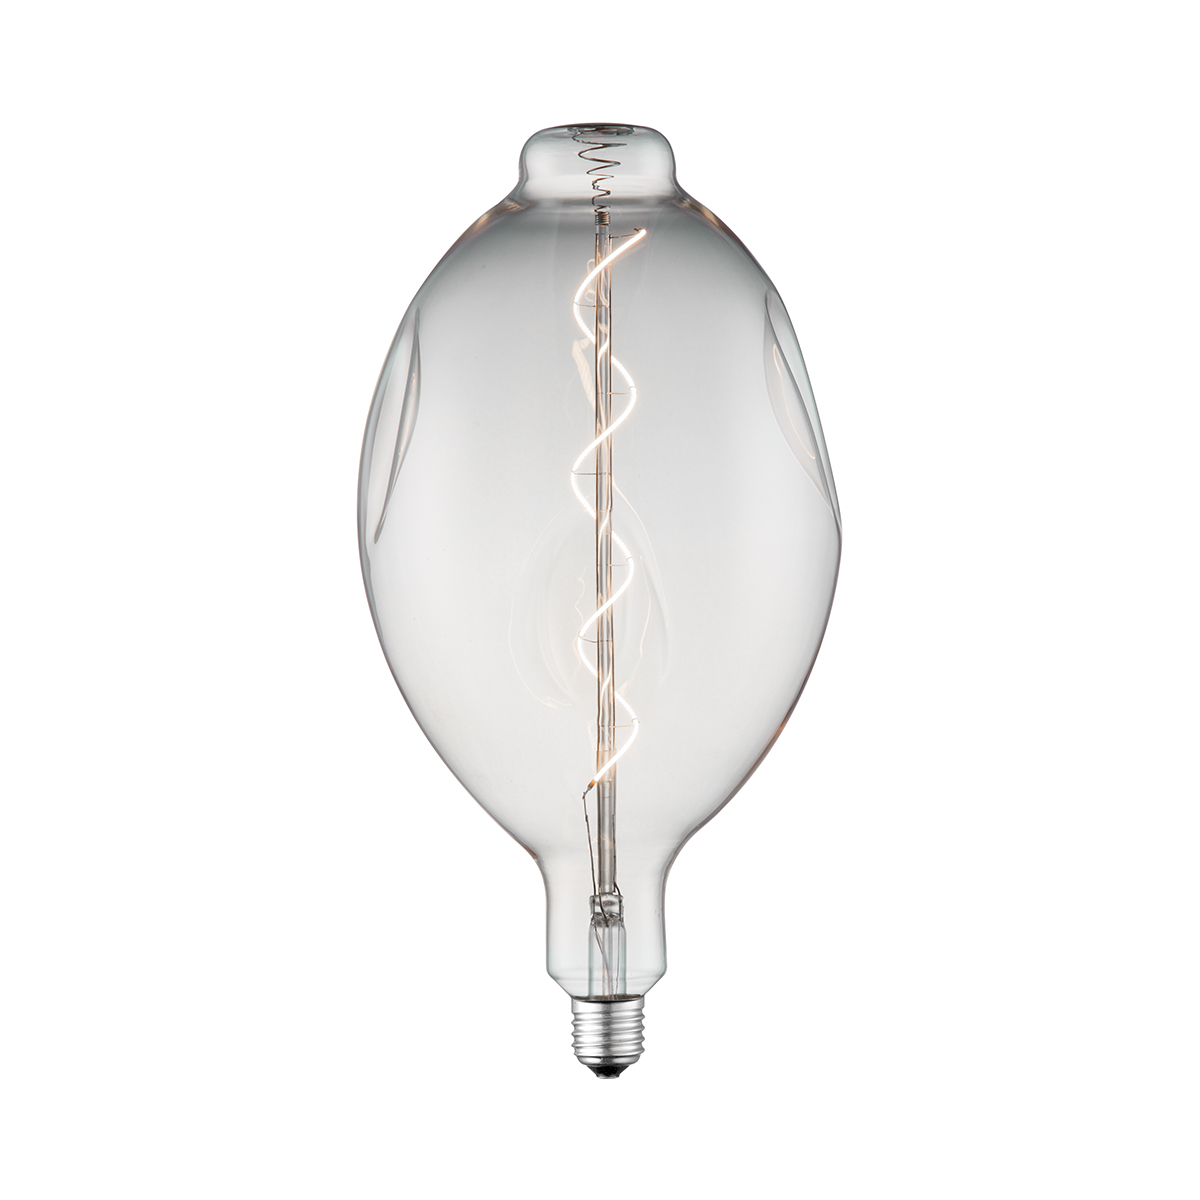 Tangla lighting - TLB-8117-04CL - LED Light Bulb Single Spiral filament - special 4W clear - medium conch - dimmable - E27